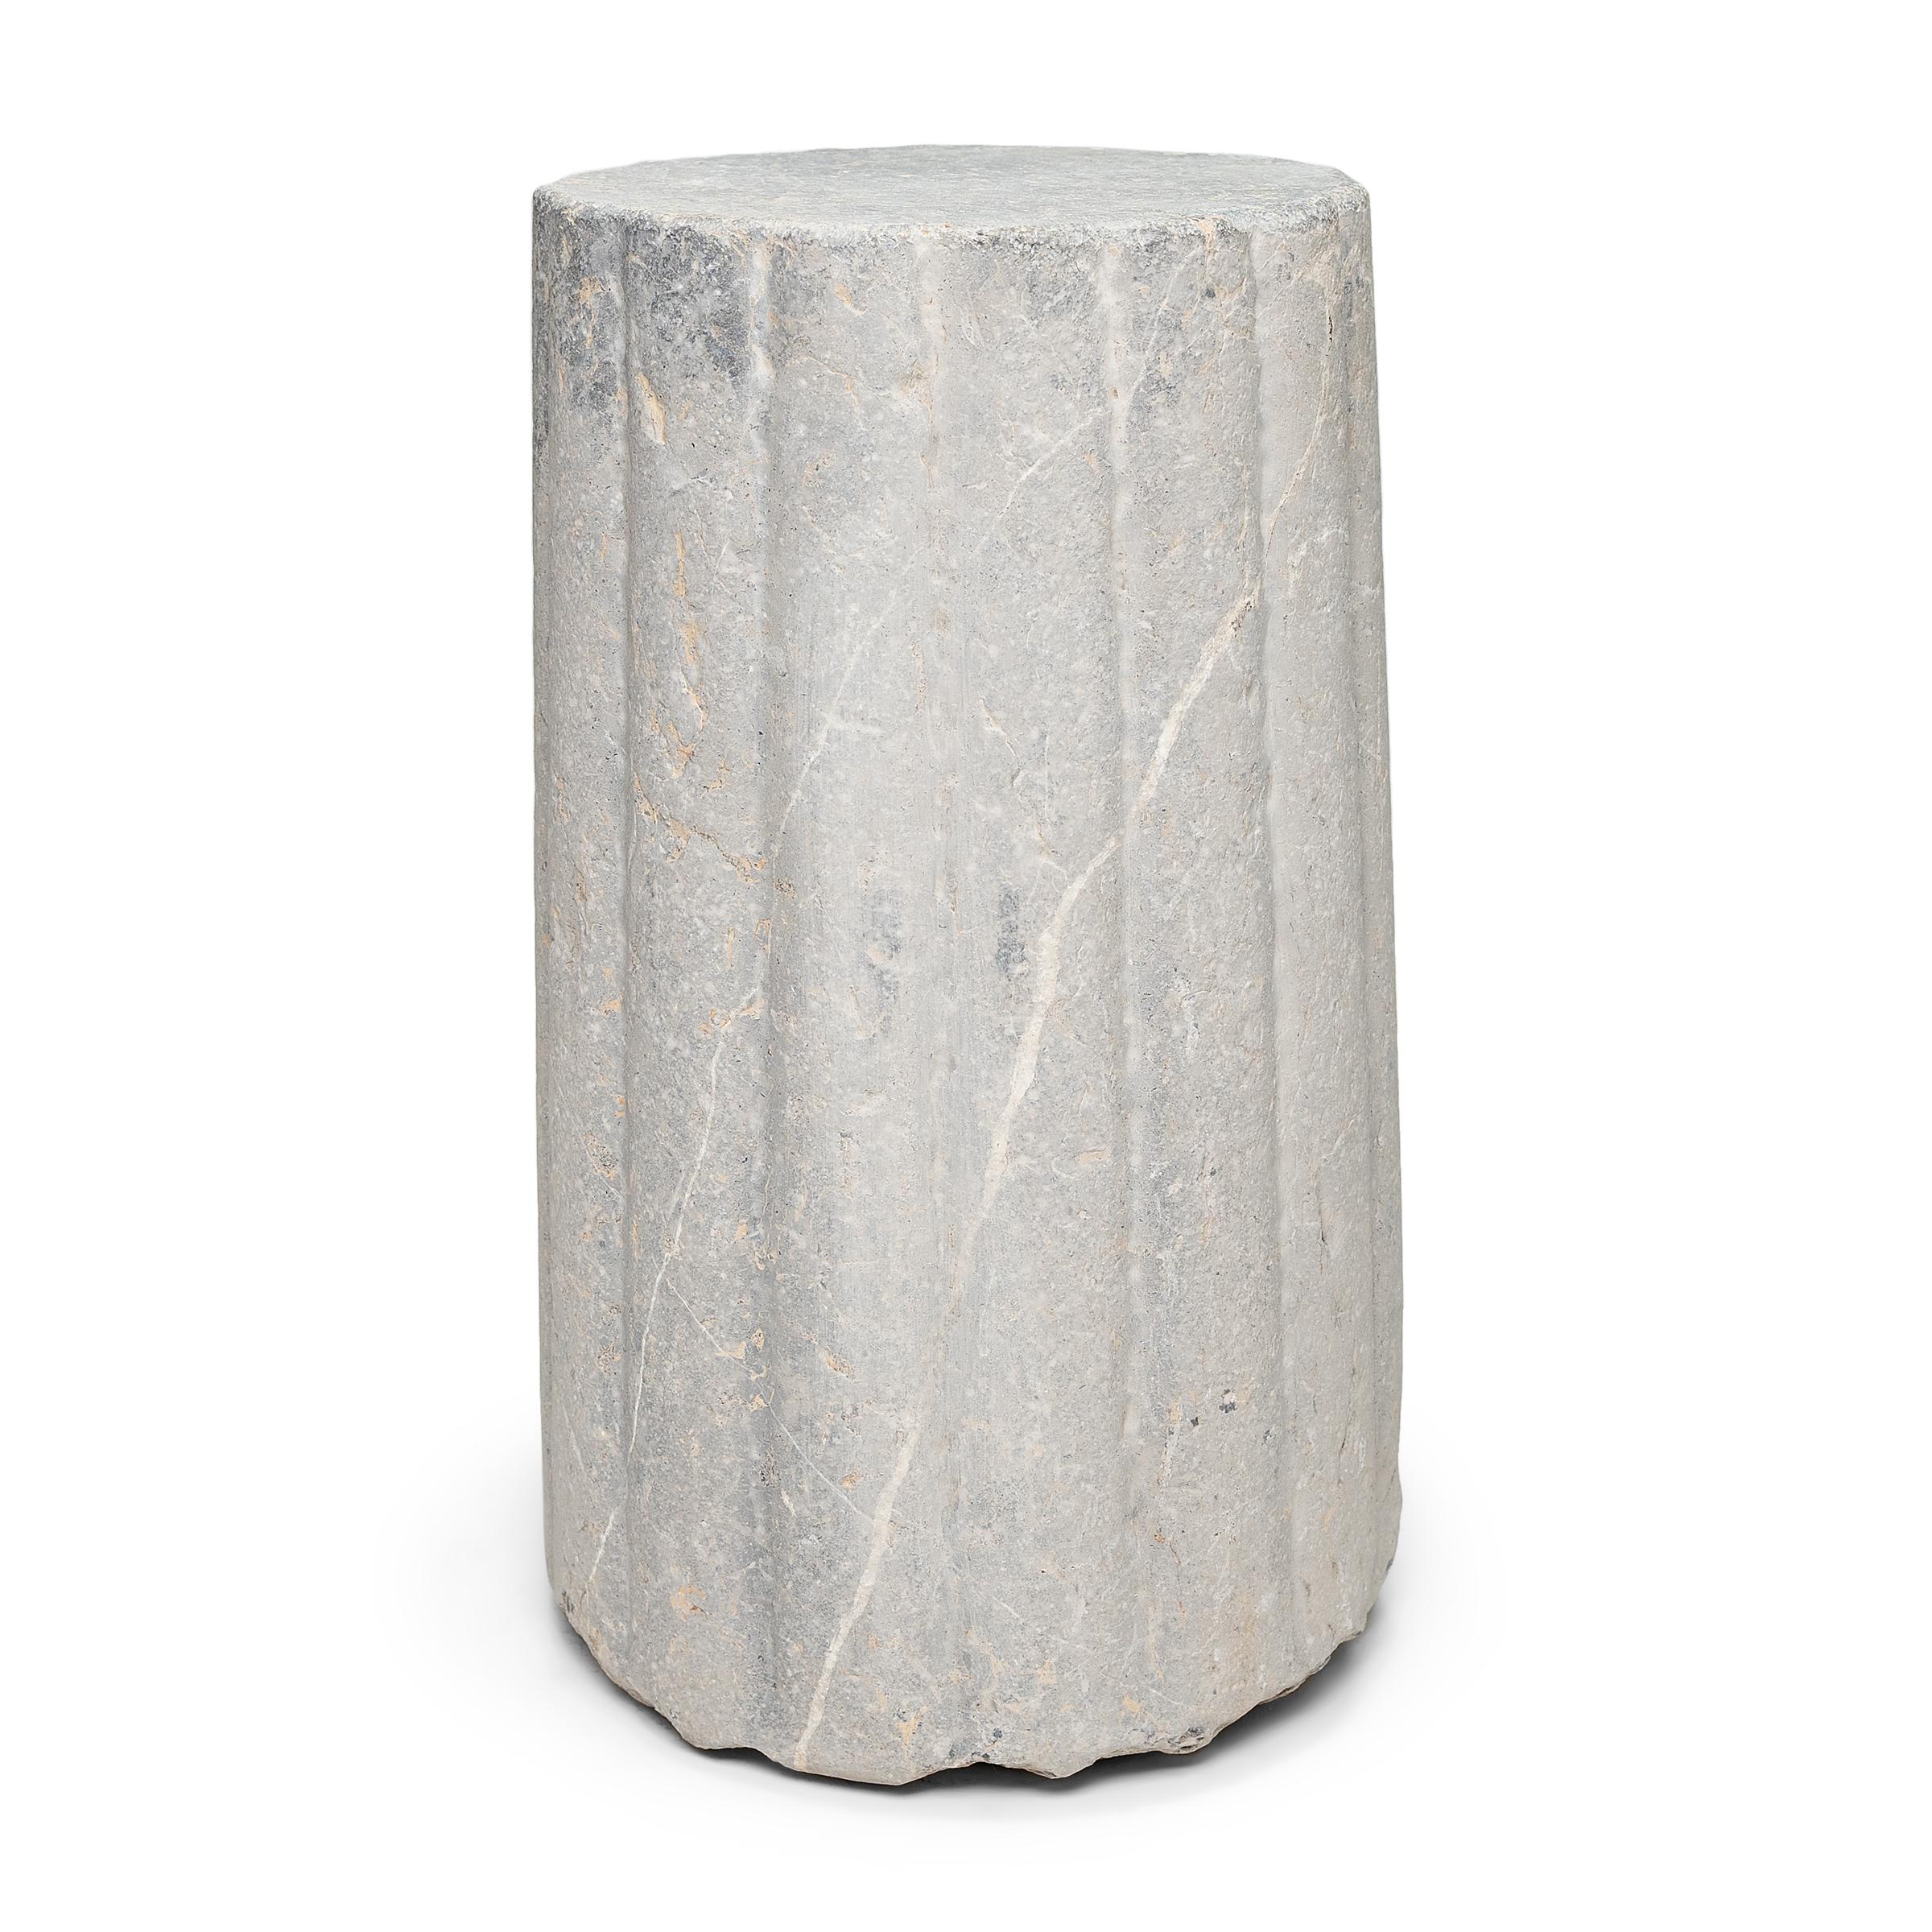 This unusual stone pedestal is actually a late 19th-century cylindrical mill stone. Hand-carved of solid limestone with a textured and ribbed surface, the stone was used for threshing wheat and other grains on a farm in China's Shanxi province. The